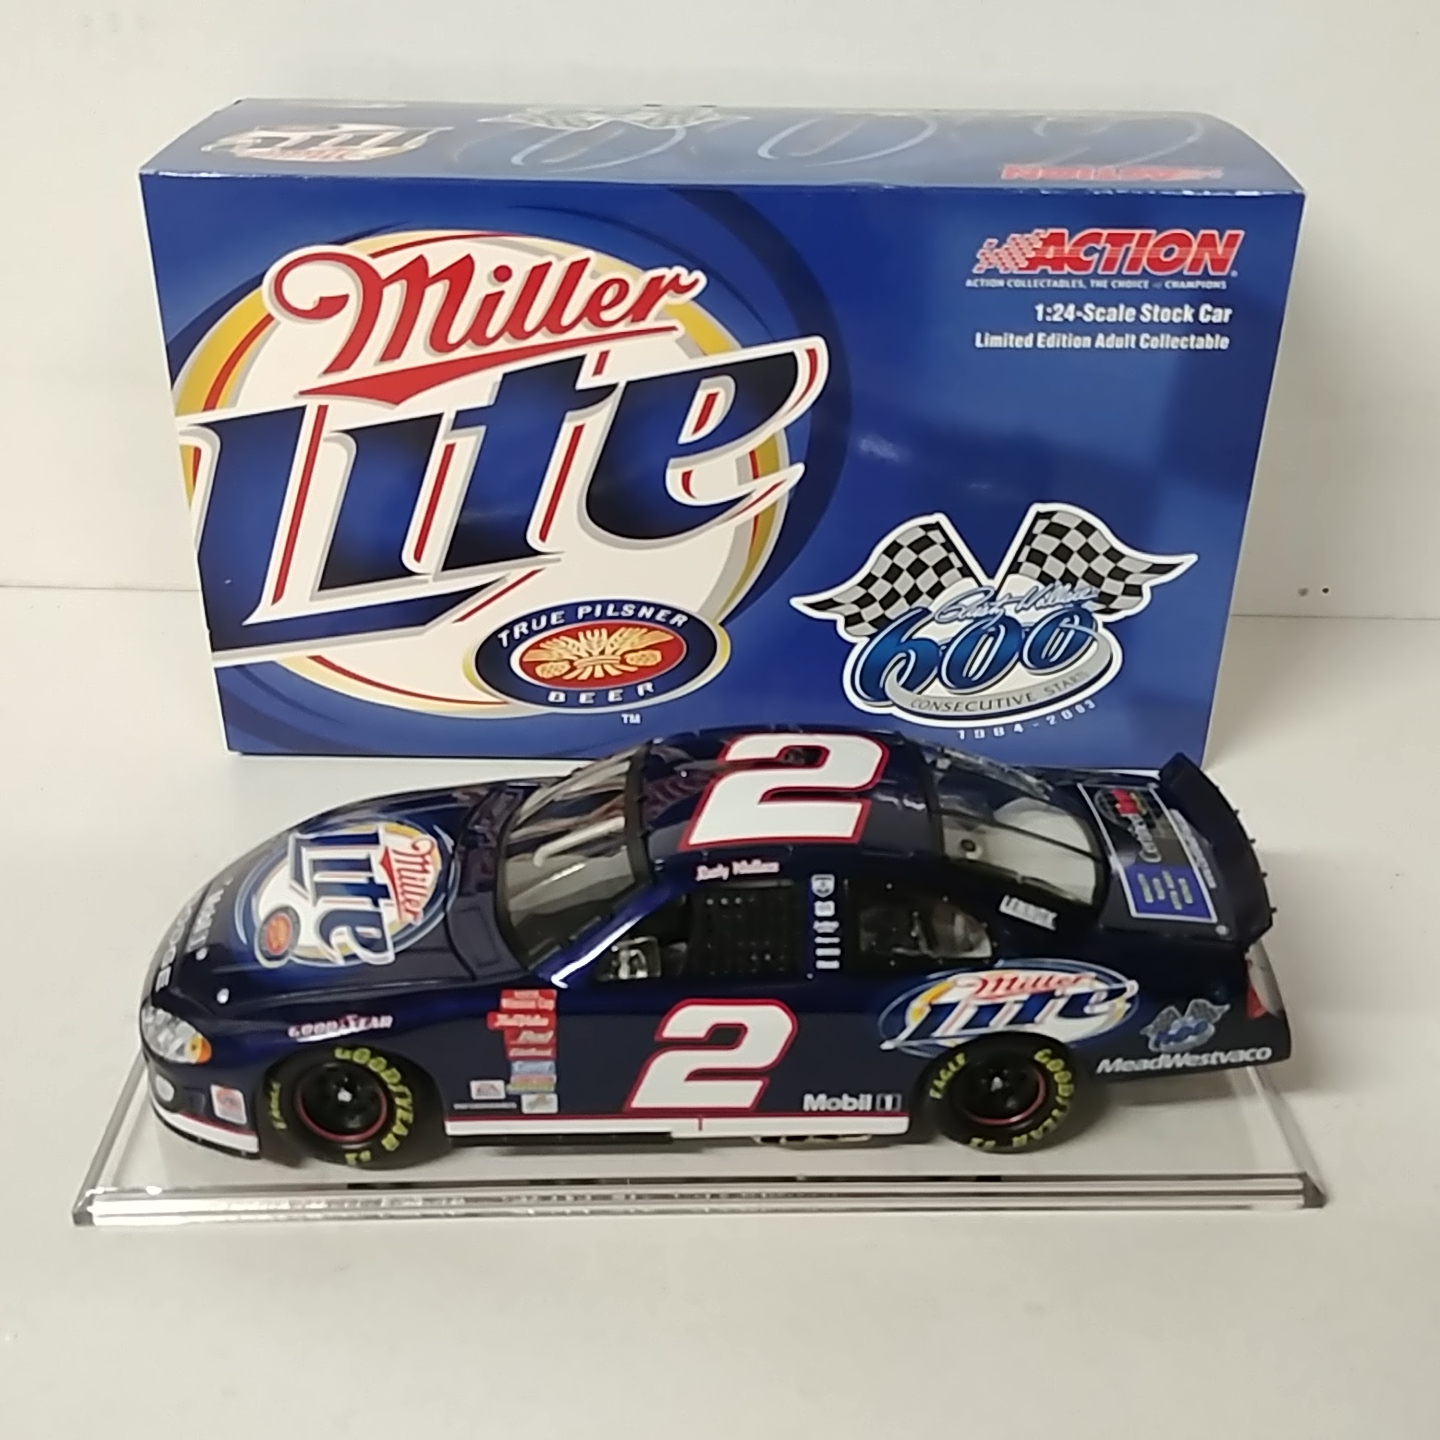 2003 Rusty Wallace 1/24th Miller Lite "600th Consecutive Start" c/w car